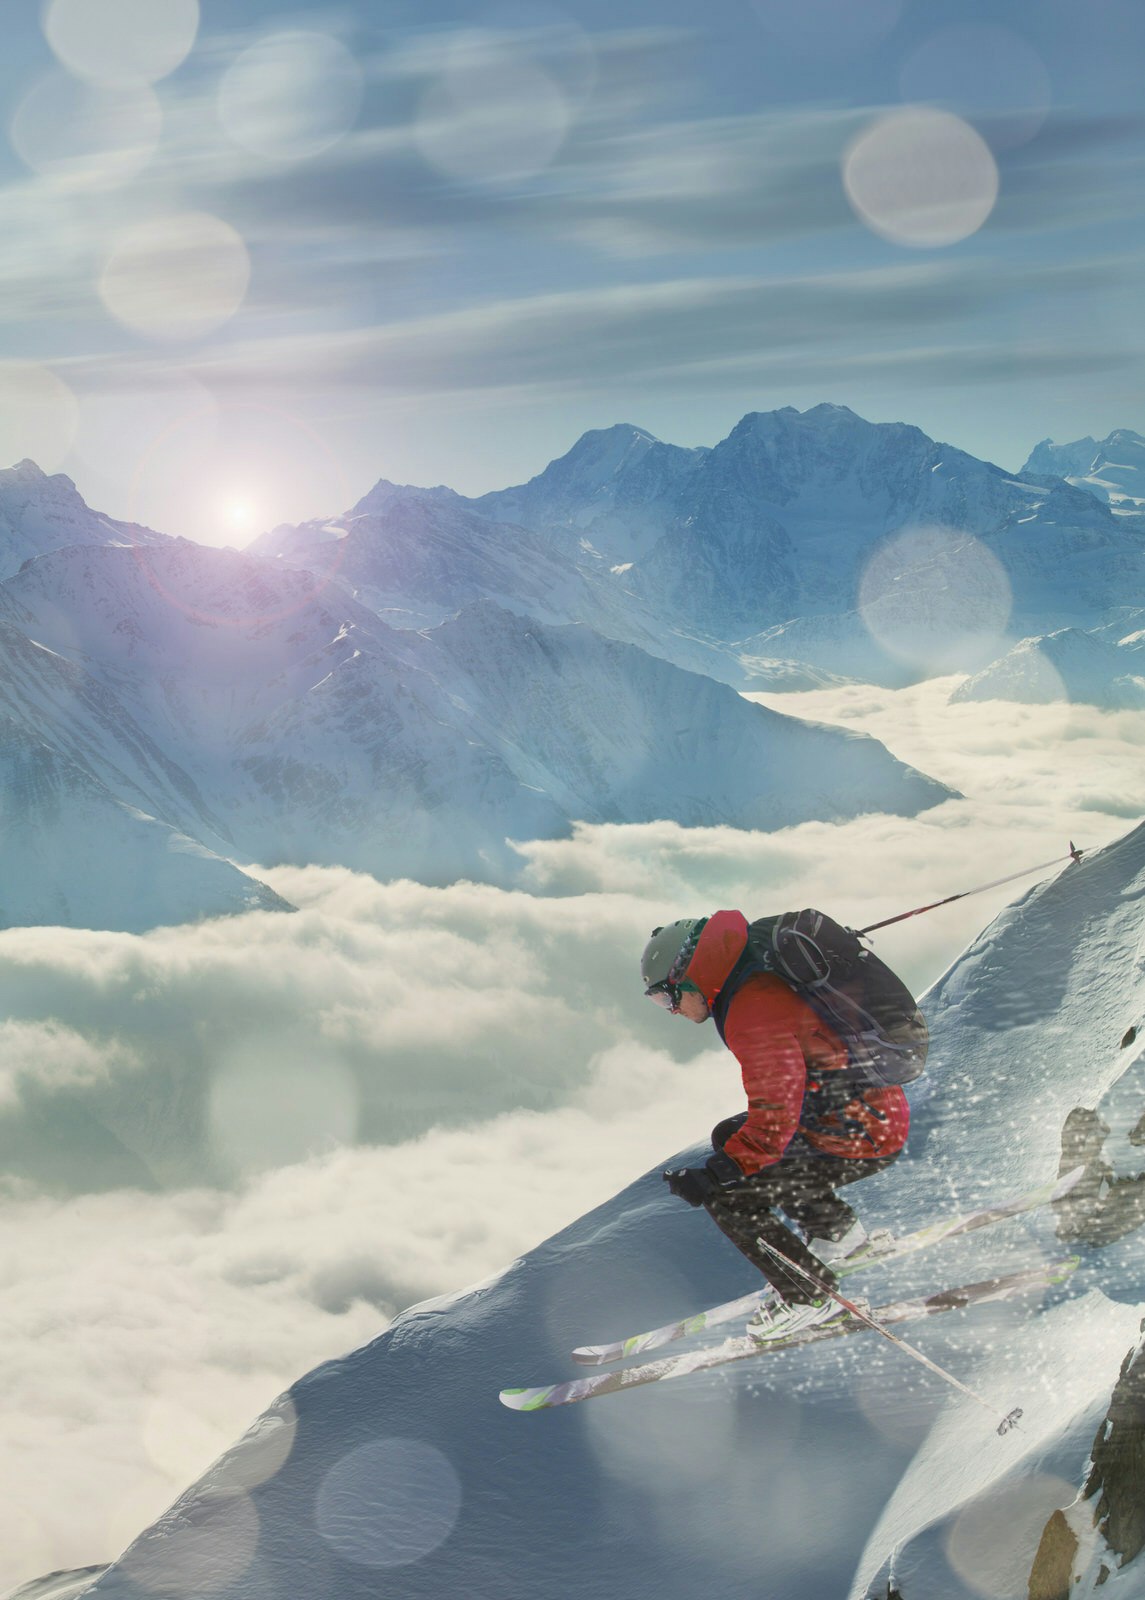 An extreme skier jumping on a snowy slope with a cloud-filled valley below